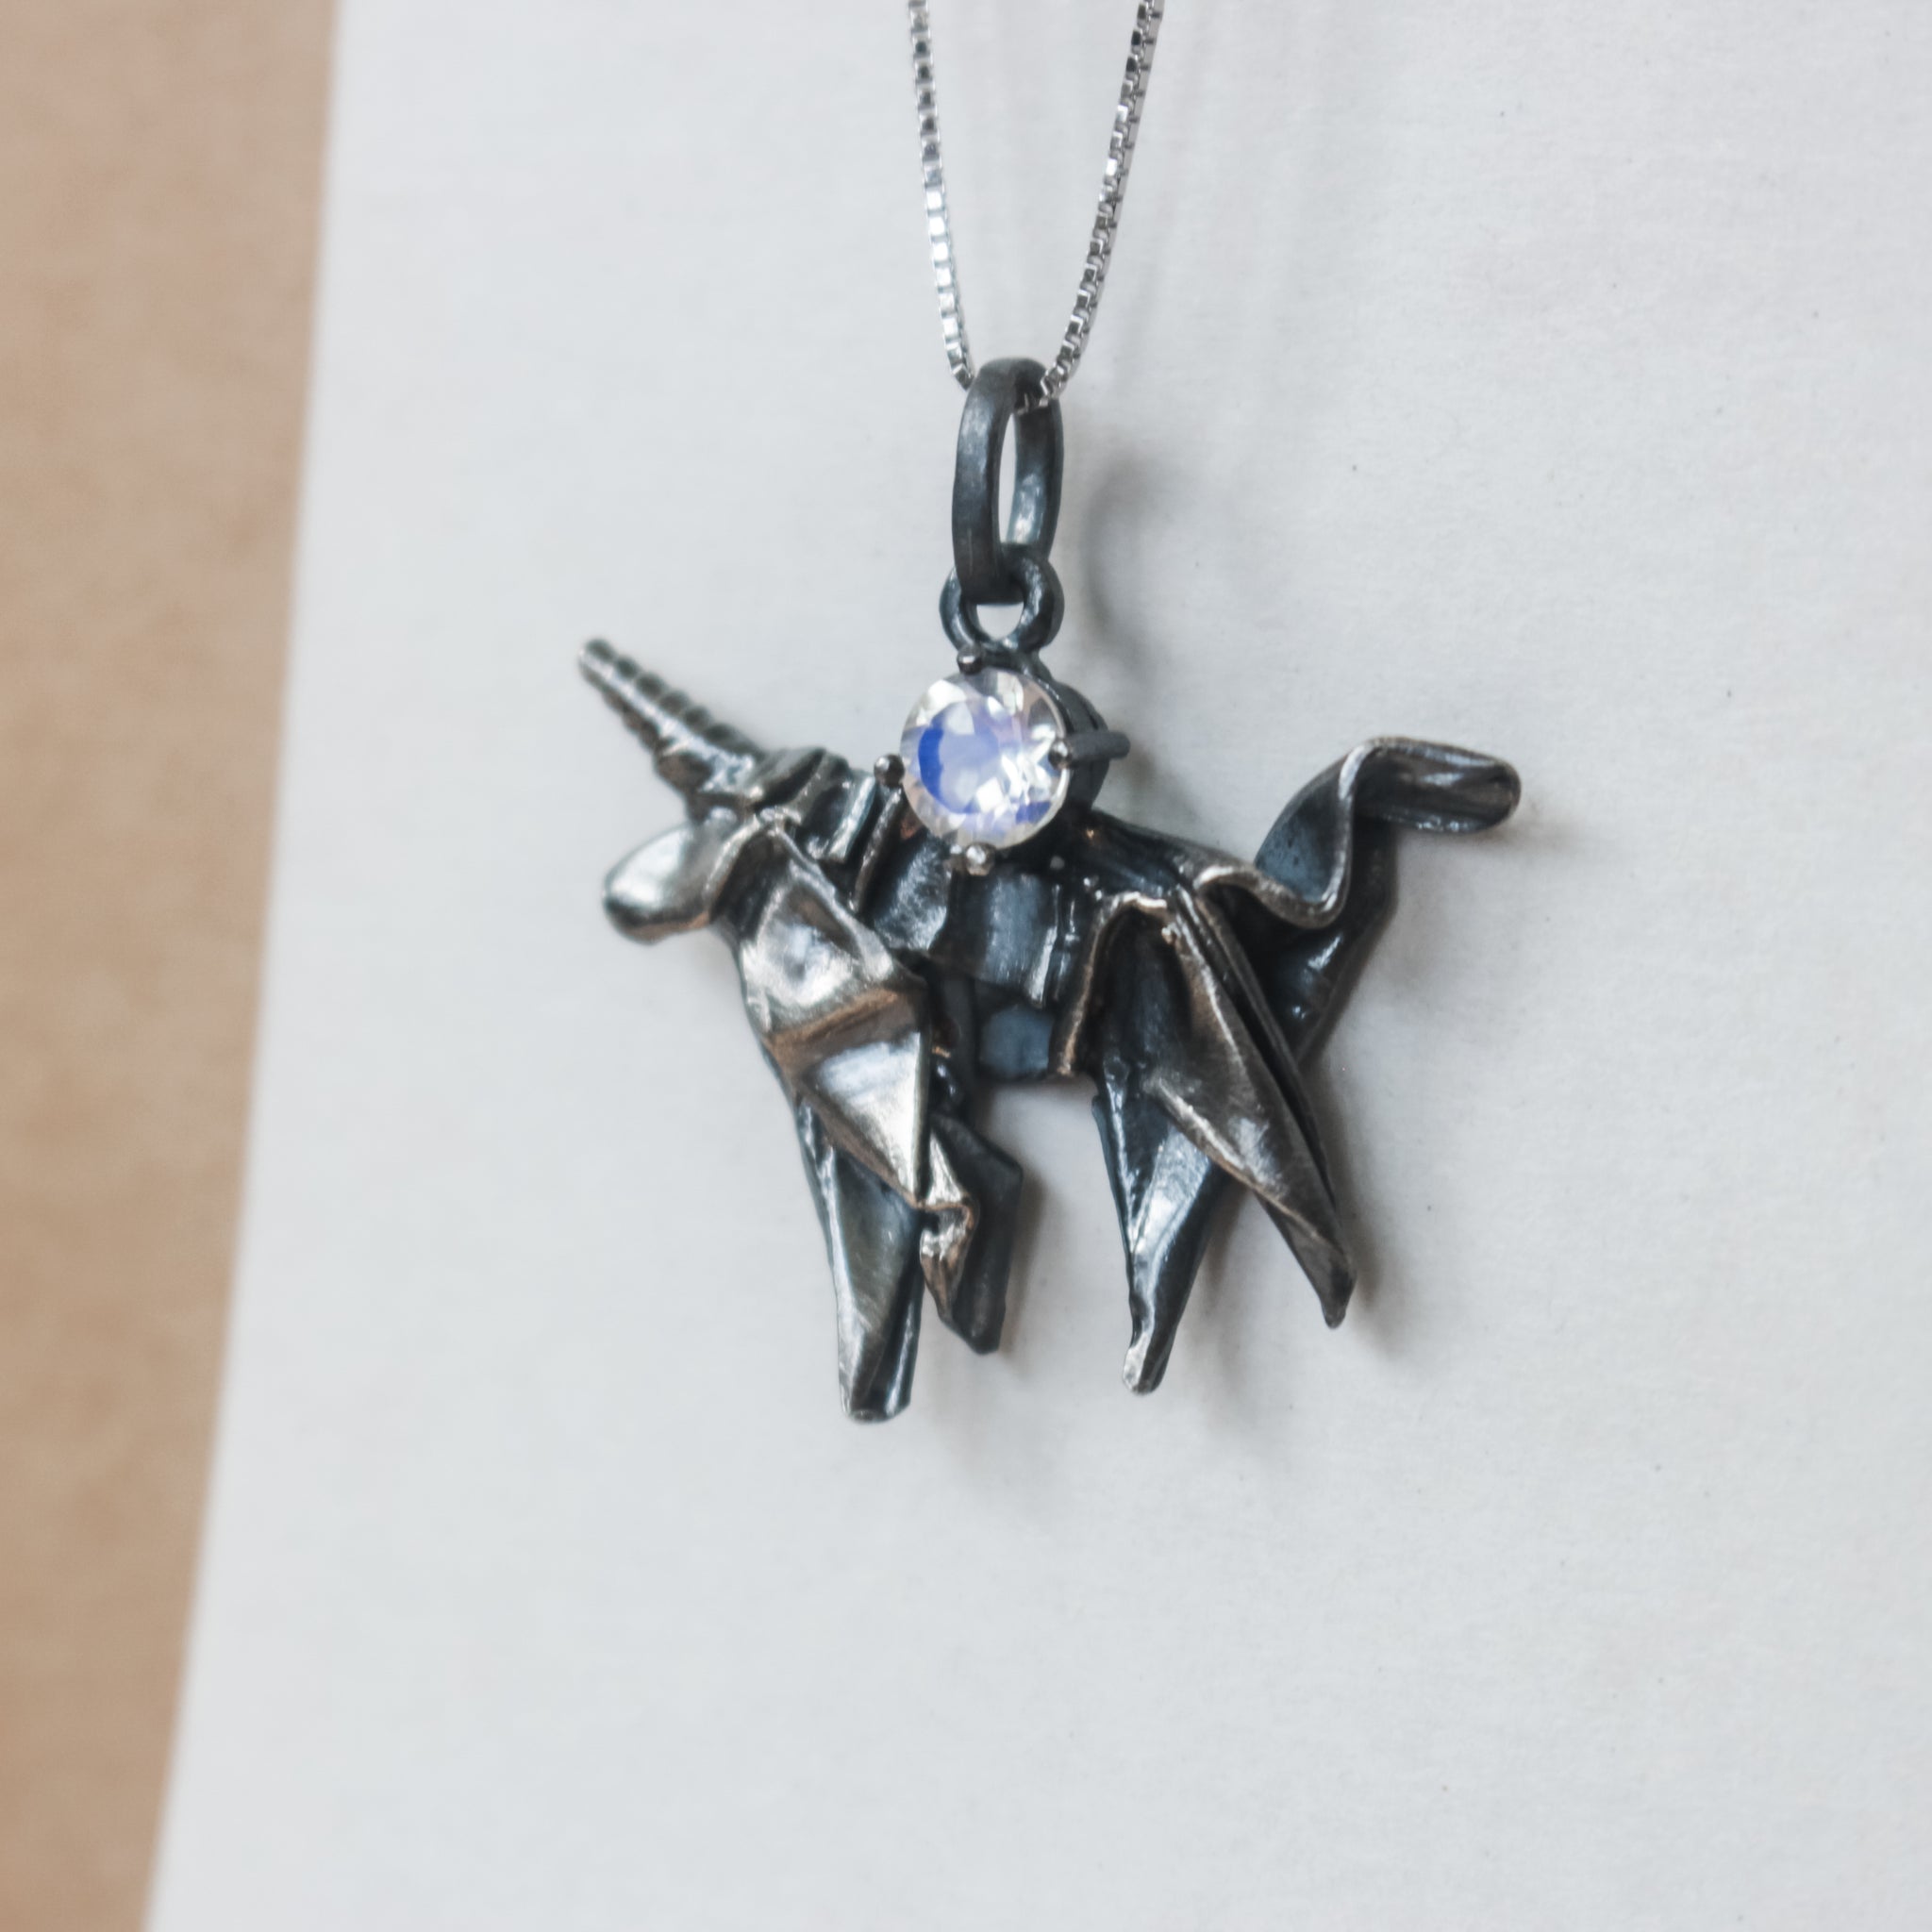 Black Silver Origami Unicorn Merry-go-round Necklace with Moonstone